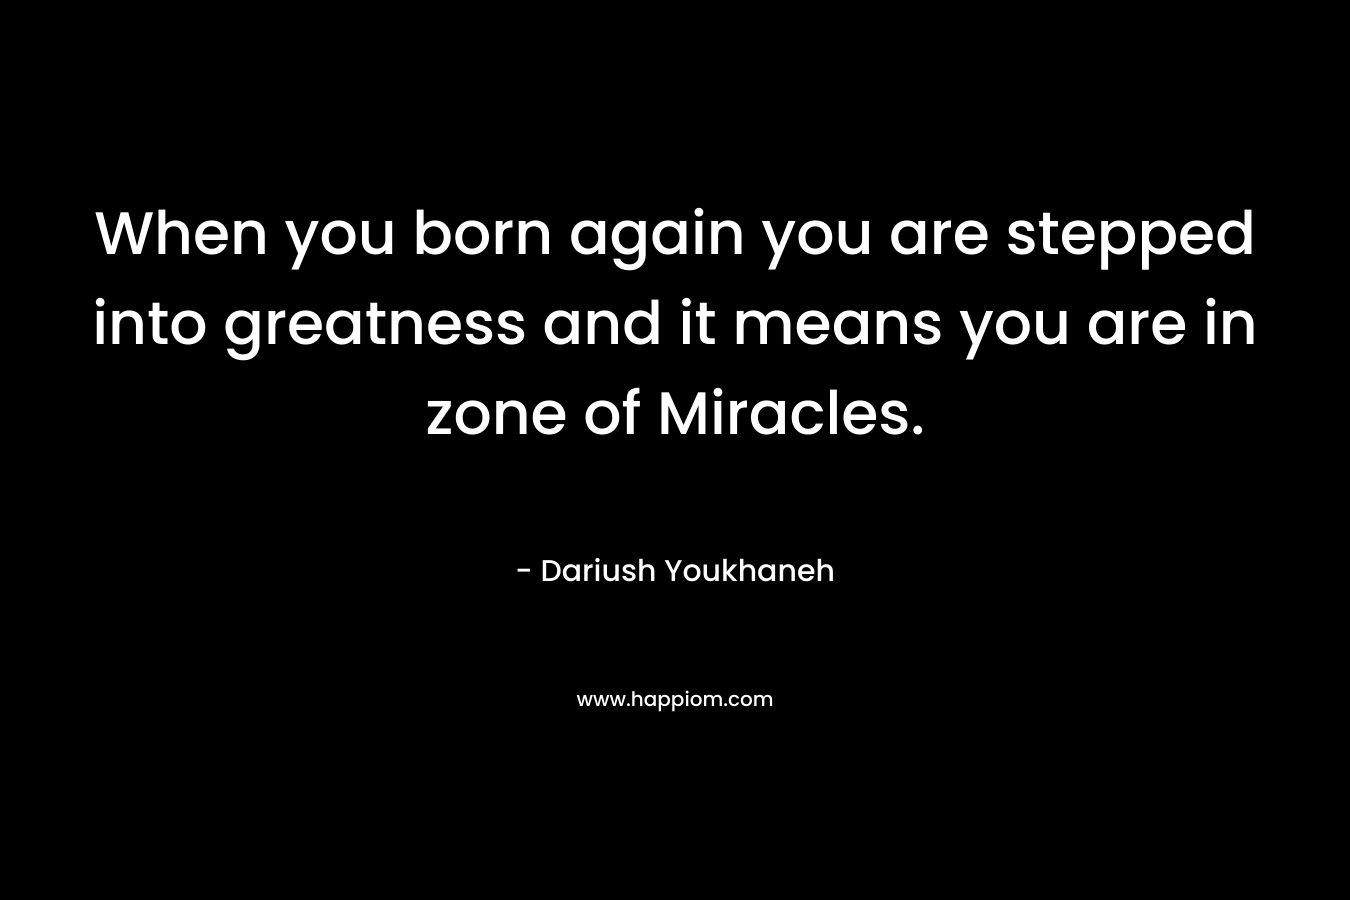 When you born again you are stepped into greatness and it means you are in zone of Miracles.